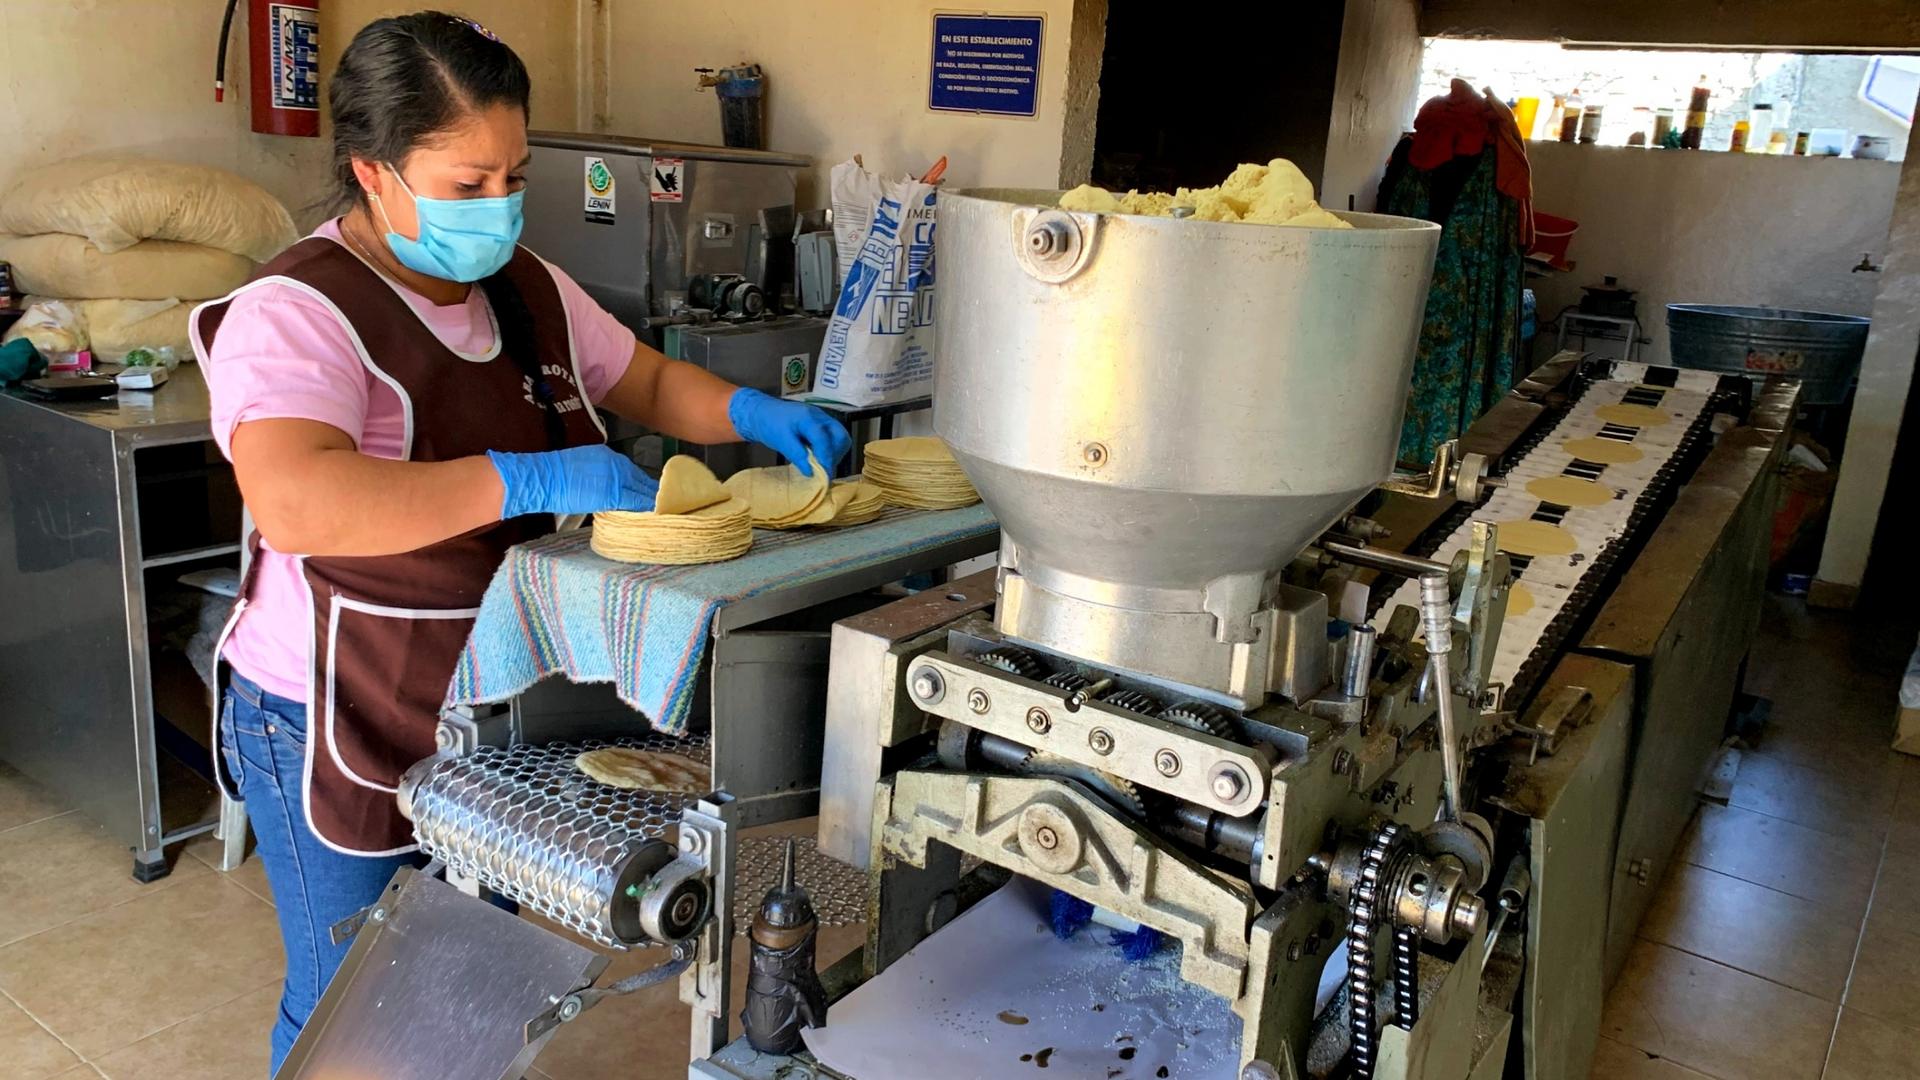 Marta Hernandez stacks tortillas coming out of the oven at La Abuela.